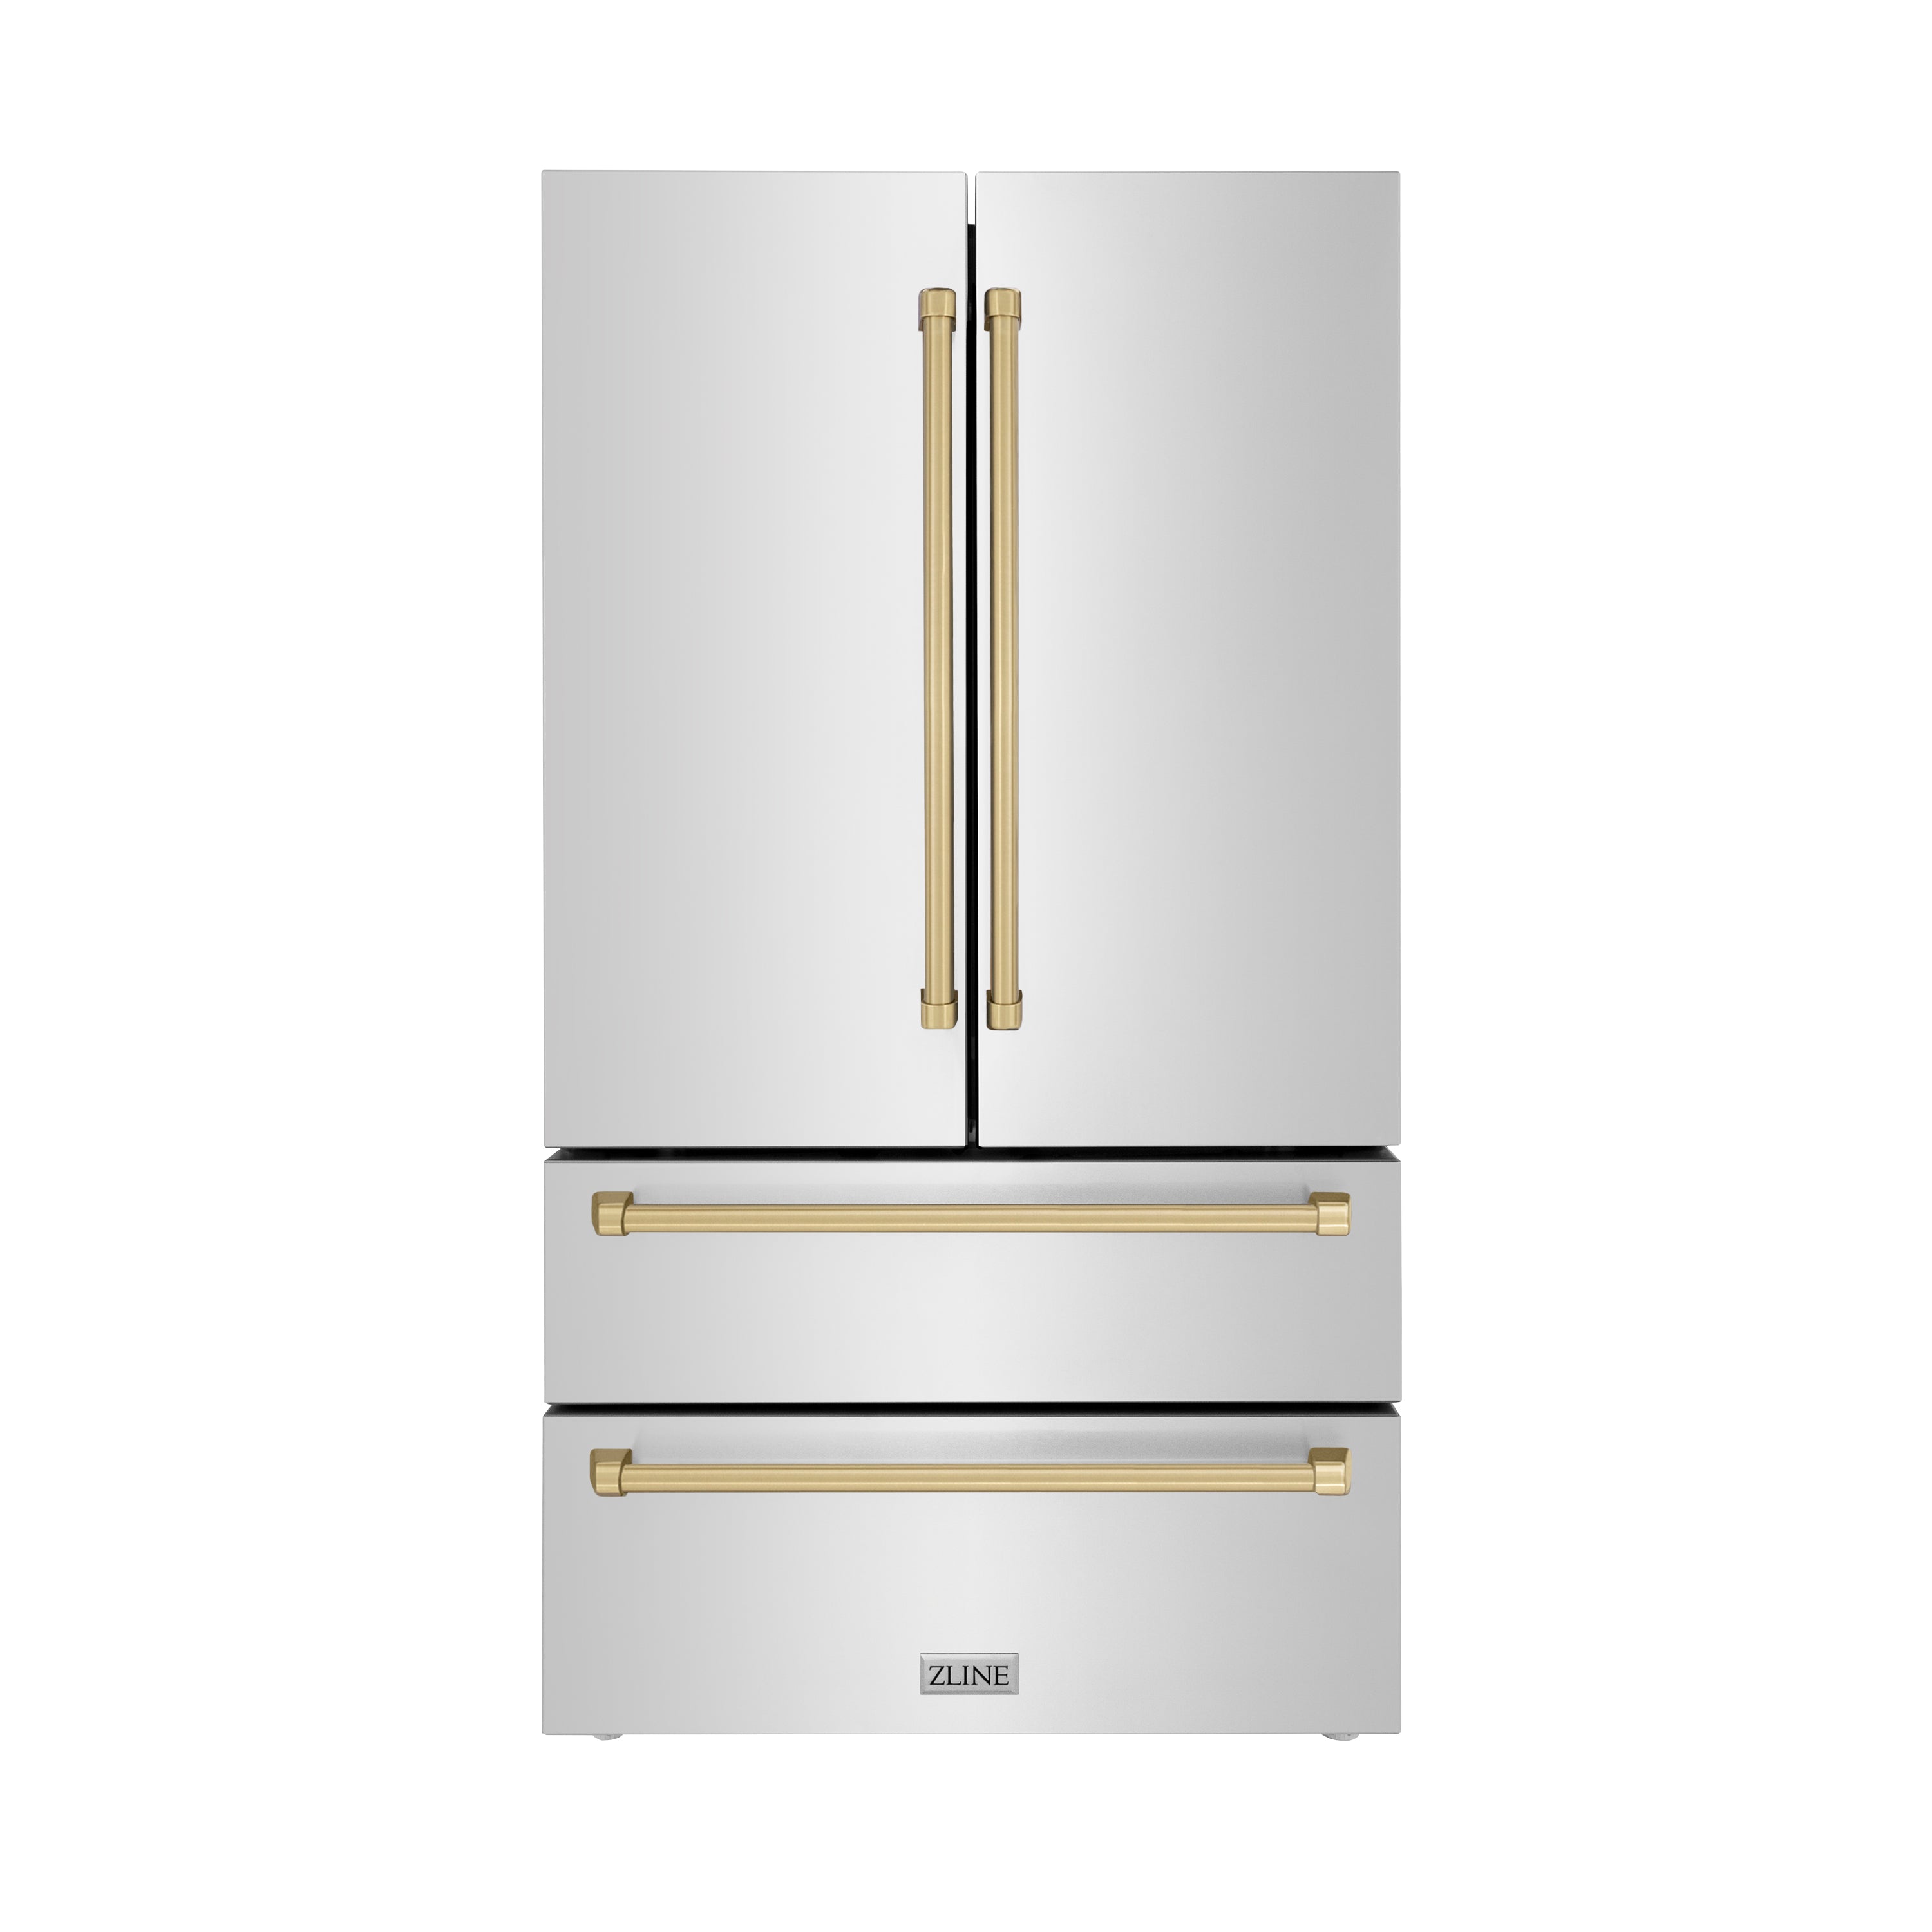 ZLINE 36" Autograph Edition 22.5 cu. ft 4-Door French Door Refrigerator with Ice Maker in Fingerprint Resistant Stainless Steel with Champagne Bronze Accents (RFMZ-36-CB)